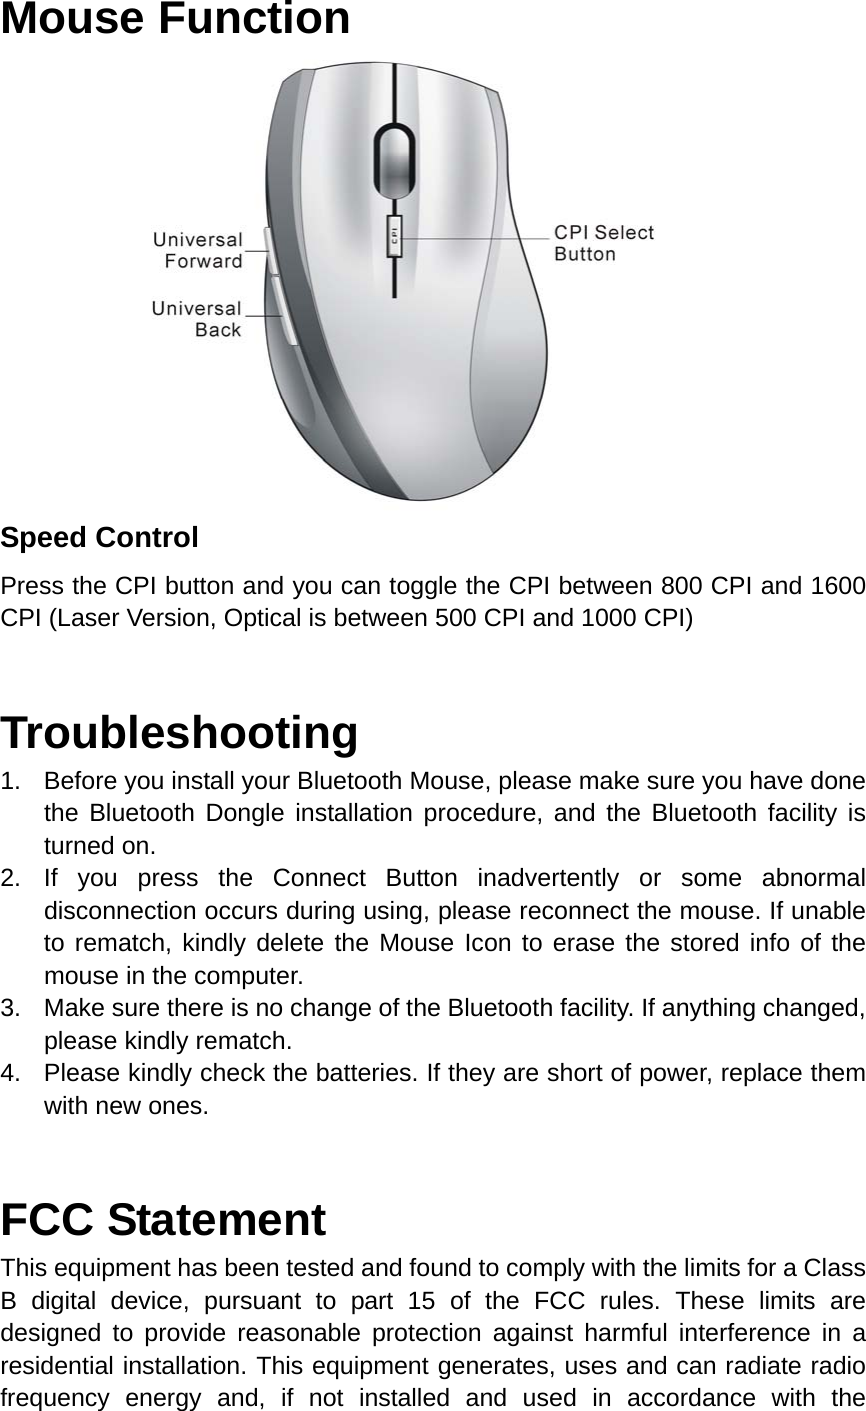 Mouse Function                       Speed Control Press the CPI button and you can toggle the CPI between 800 CPI and 1600 CPI (Laser Version, Optical is between 500 CPI and 1000 CPI)  Troubleshooting 1.  Before you install your Bluetooth Mouse, please make sure you have done the Bluetooth Dongle installation procedure, and the Bluetooth facility is turned on. 2. If you press the Connect Button inadvertently or some abnormal disconnection occurs during using, please reconnect the mouse. If unable to rematch, kindly delete the Mouse Icon to erase the stored info of the mouse in the computer. 3.  Make sure there is no change of the Bluetooth facility. If anything changed, please kindly rematch. 4.  Please kindly check the batteries. If they are short of power, replace them with new ones.   FCC Statement This equipment has been tested and found to comply with the limits for a Class B digital device, pursuant to part 15 of the FCC rules. These limits are designed to provide reasonable protection against harmful interference in a residential installation. This equipment generates, uses and can radiate radio frequency energy and, if not installed and used in accordance with the 